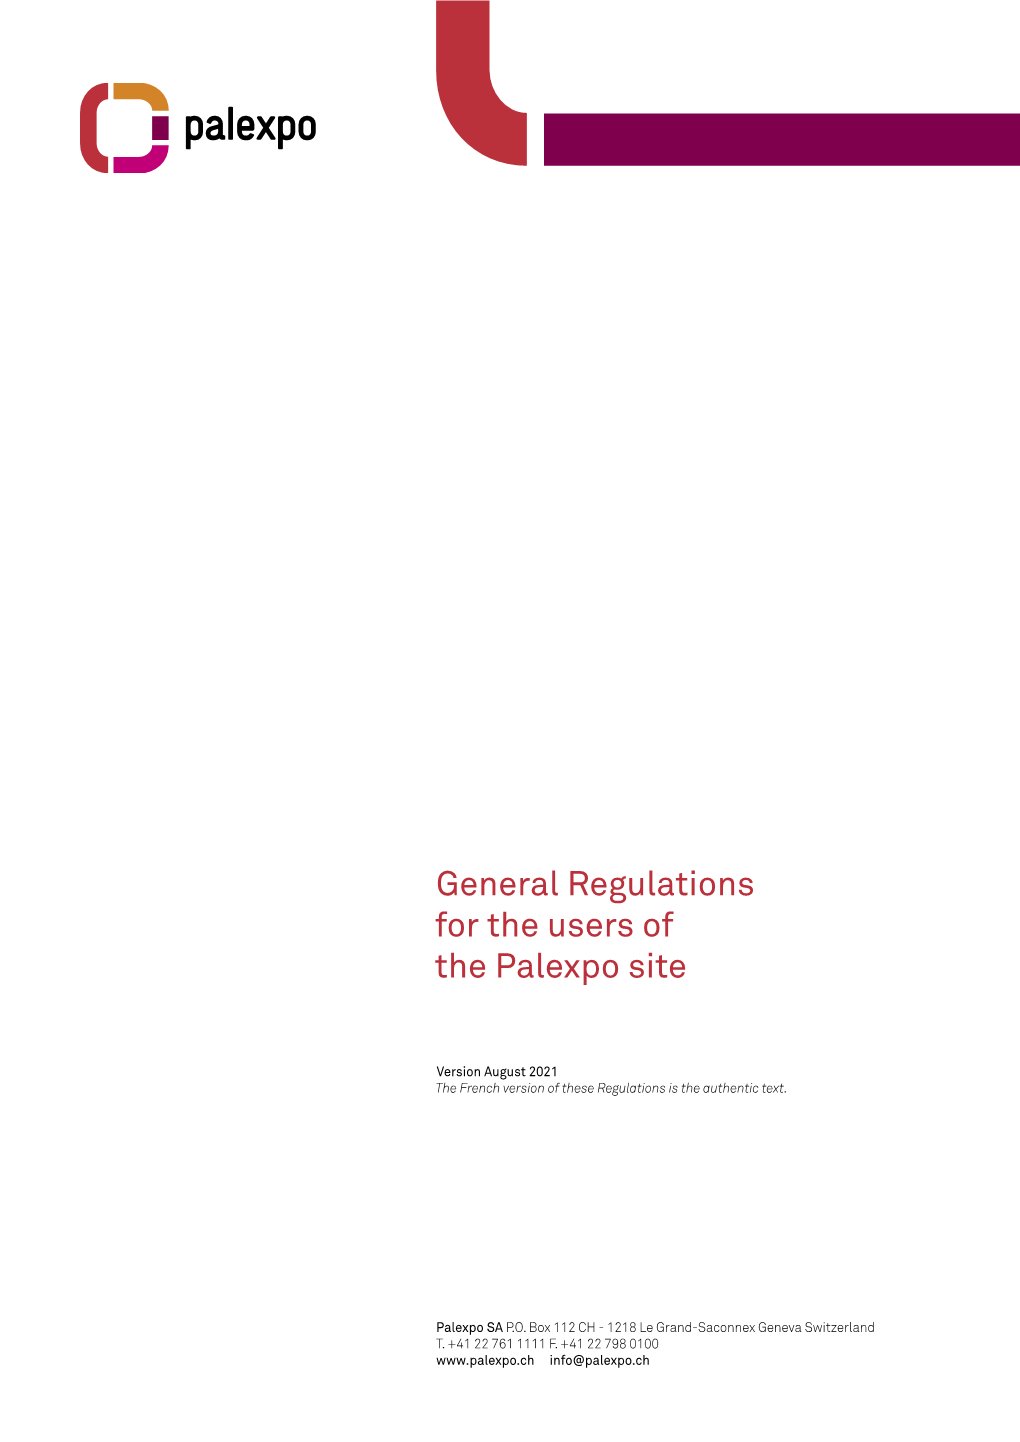 General Regulations for the Users of the Palexpo Site